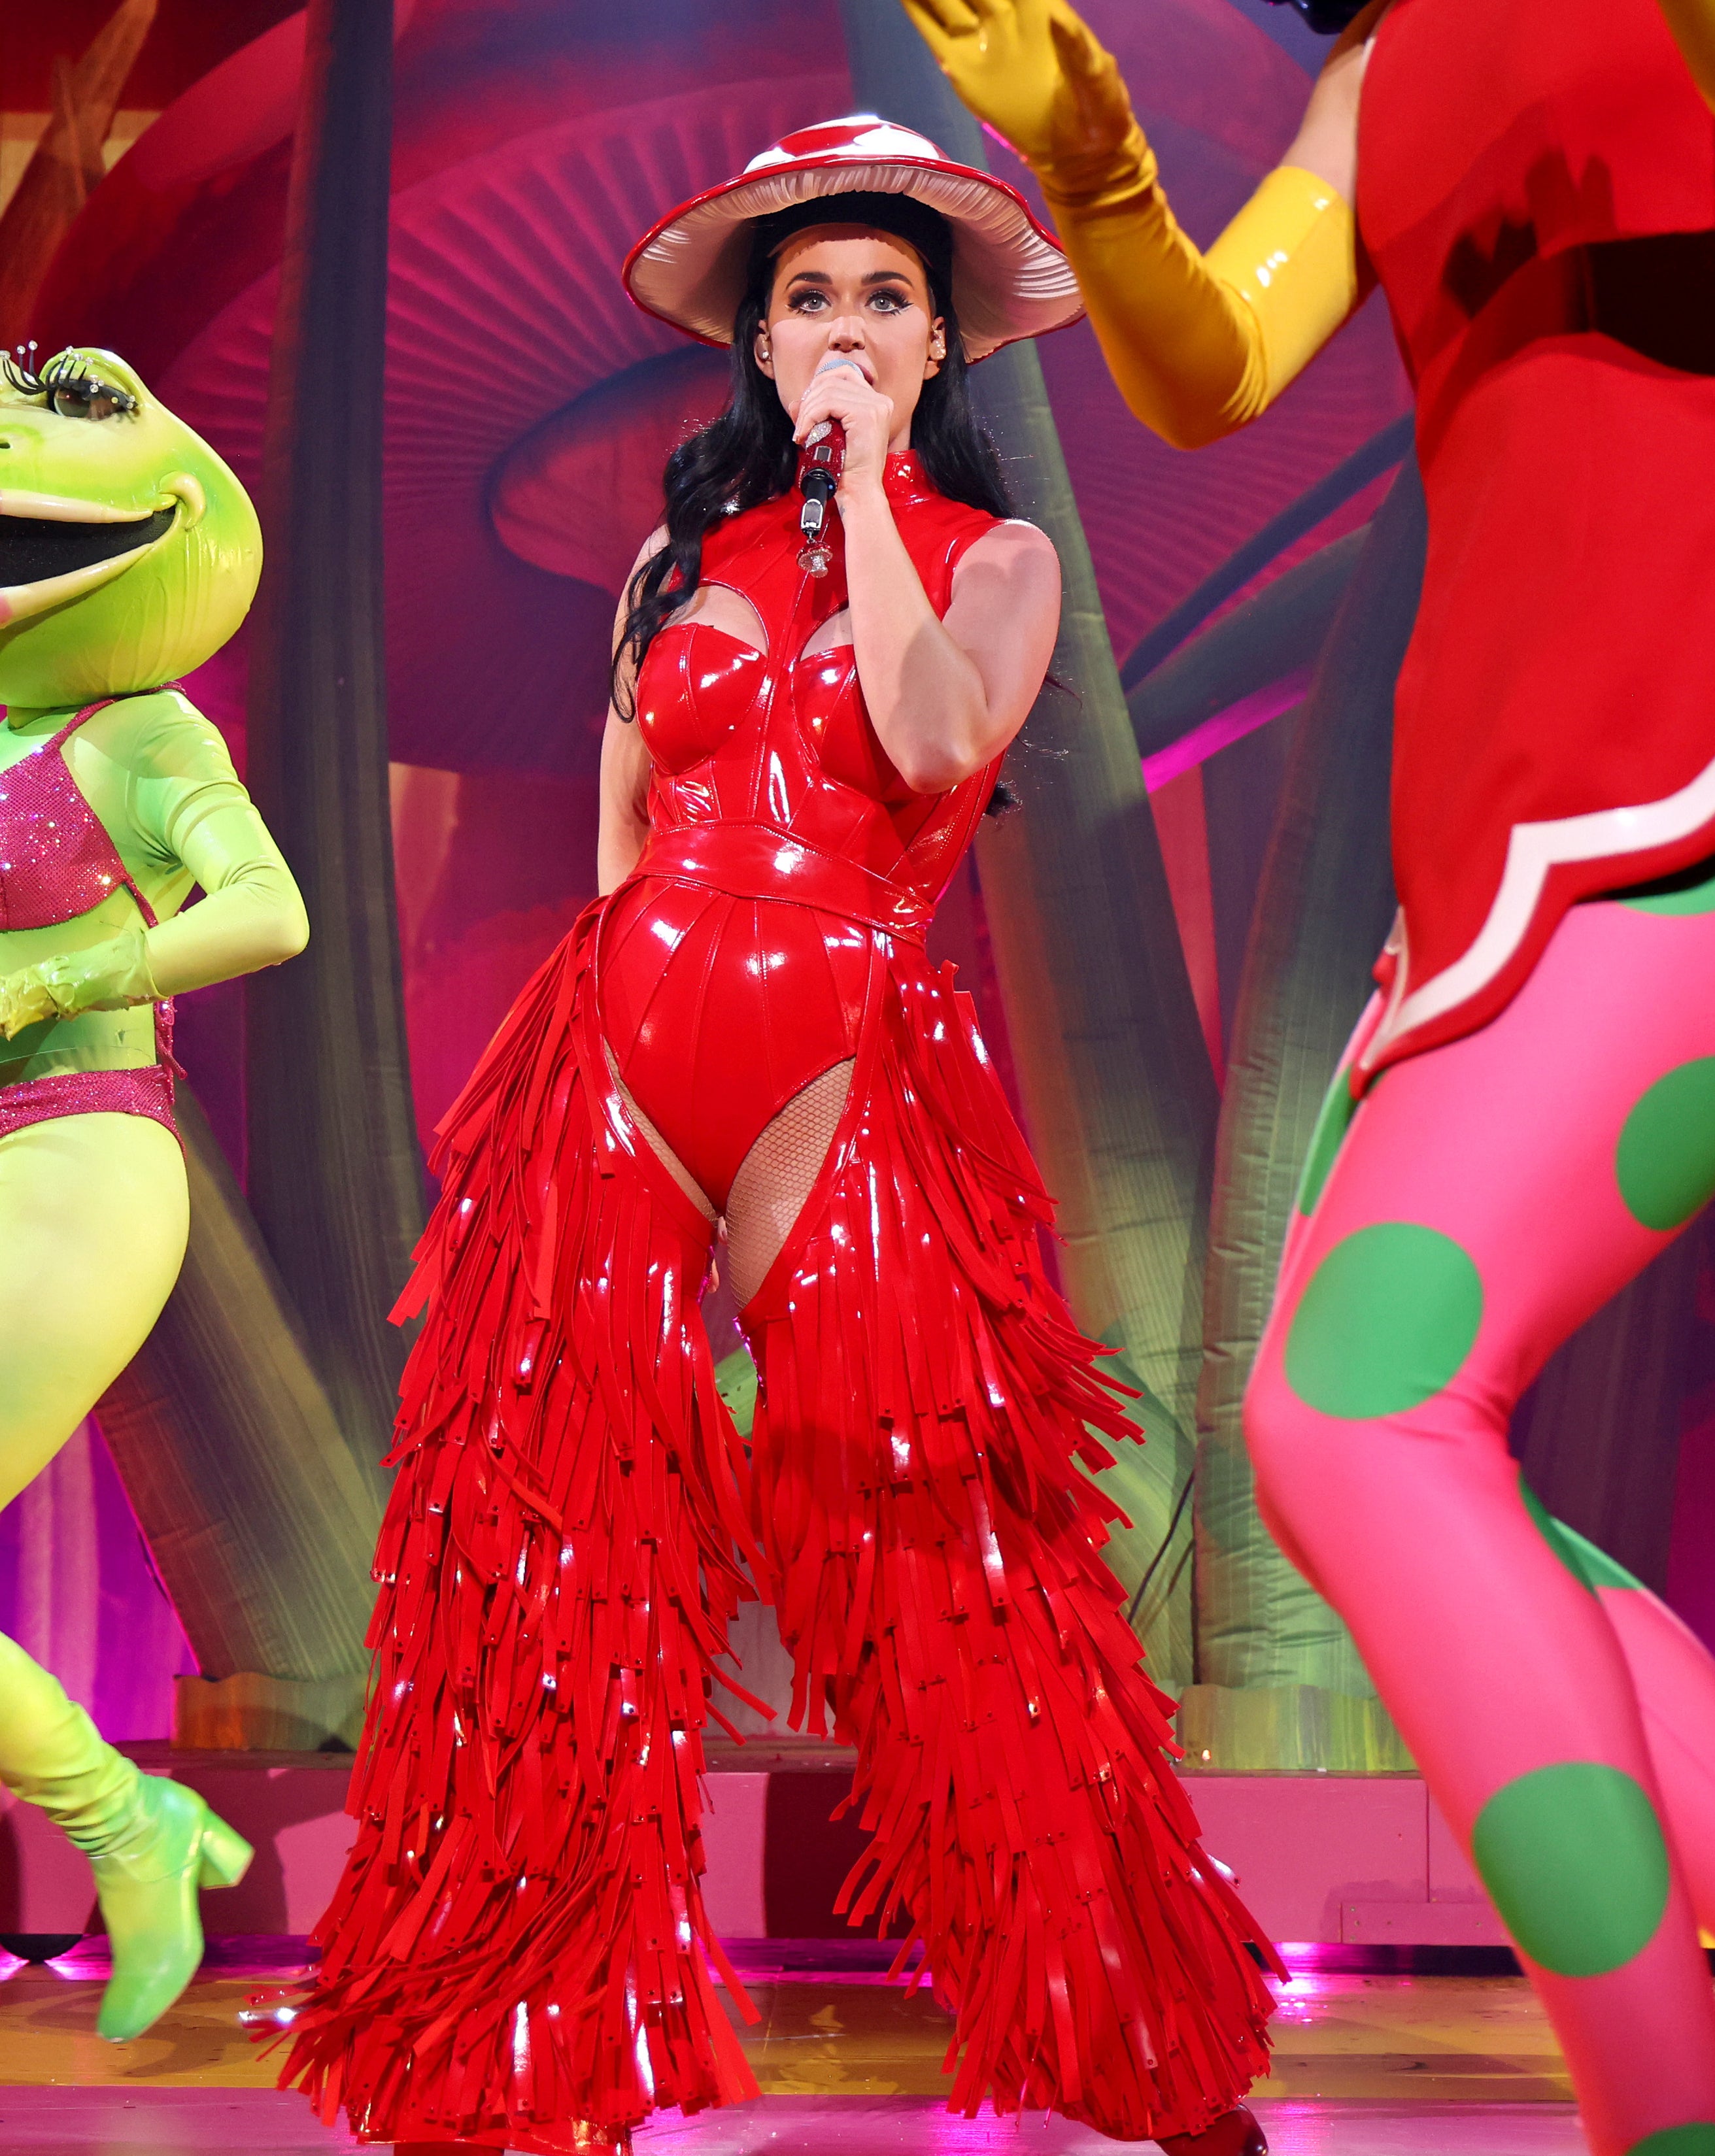 Katy Perry onstage